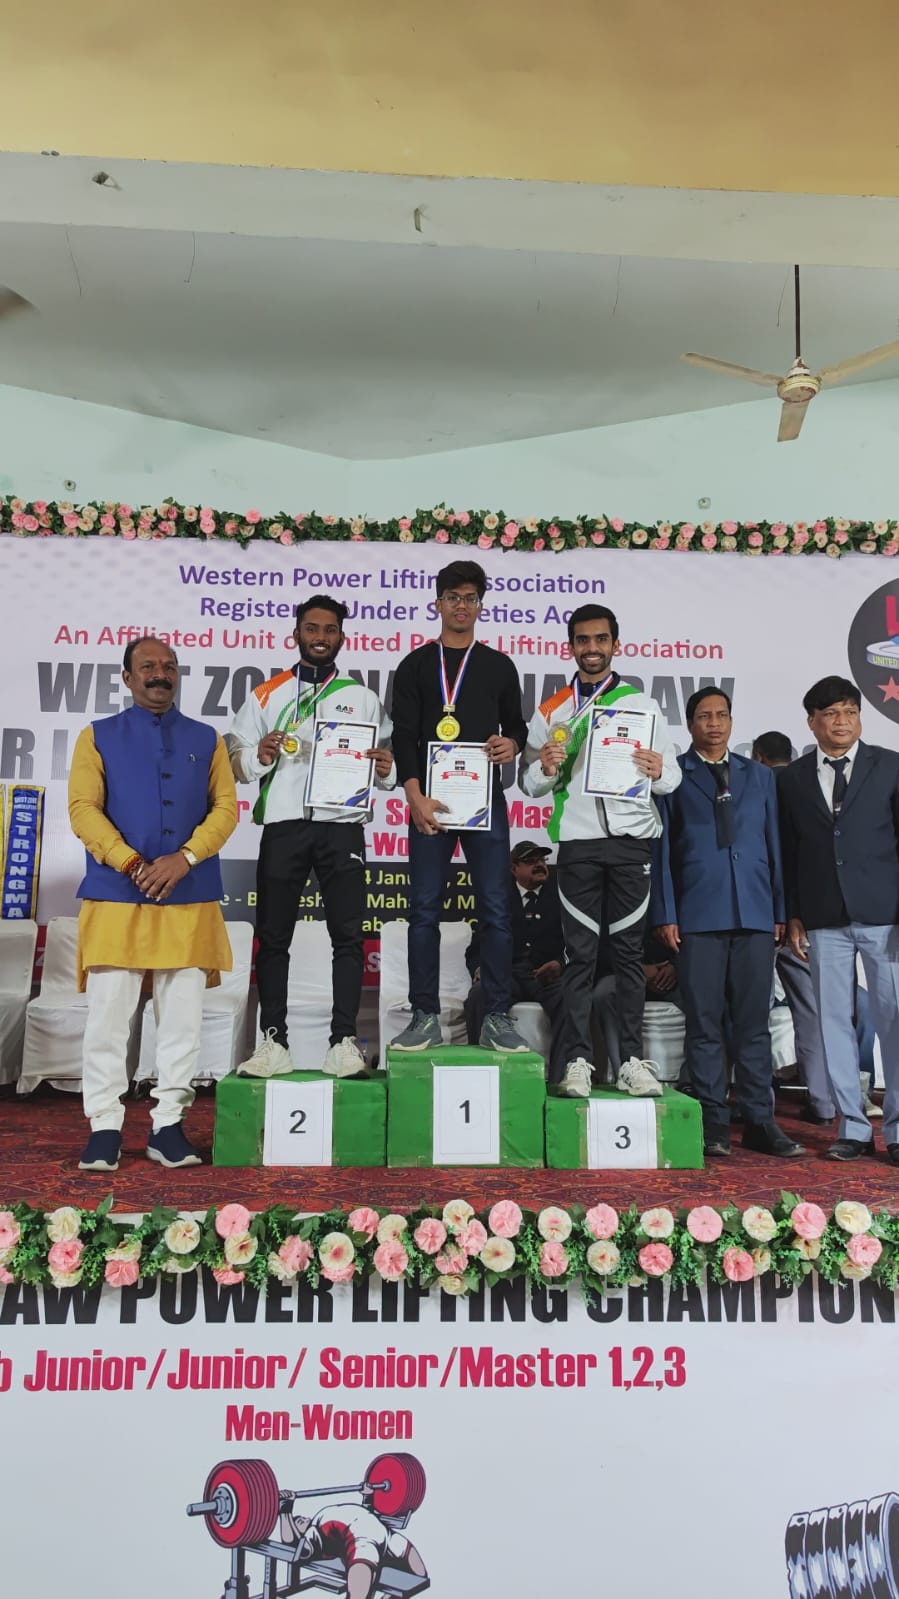 E:\NAAC\C-III Photos\Awards and recognitions photos\parvej_sports\WhatsApp Image 2024-04-22 at 3.01.20 AM (1).jpeg